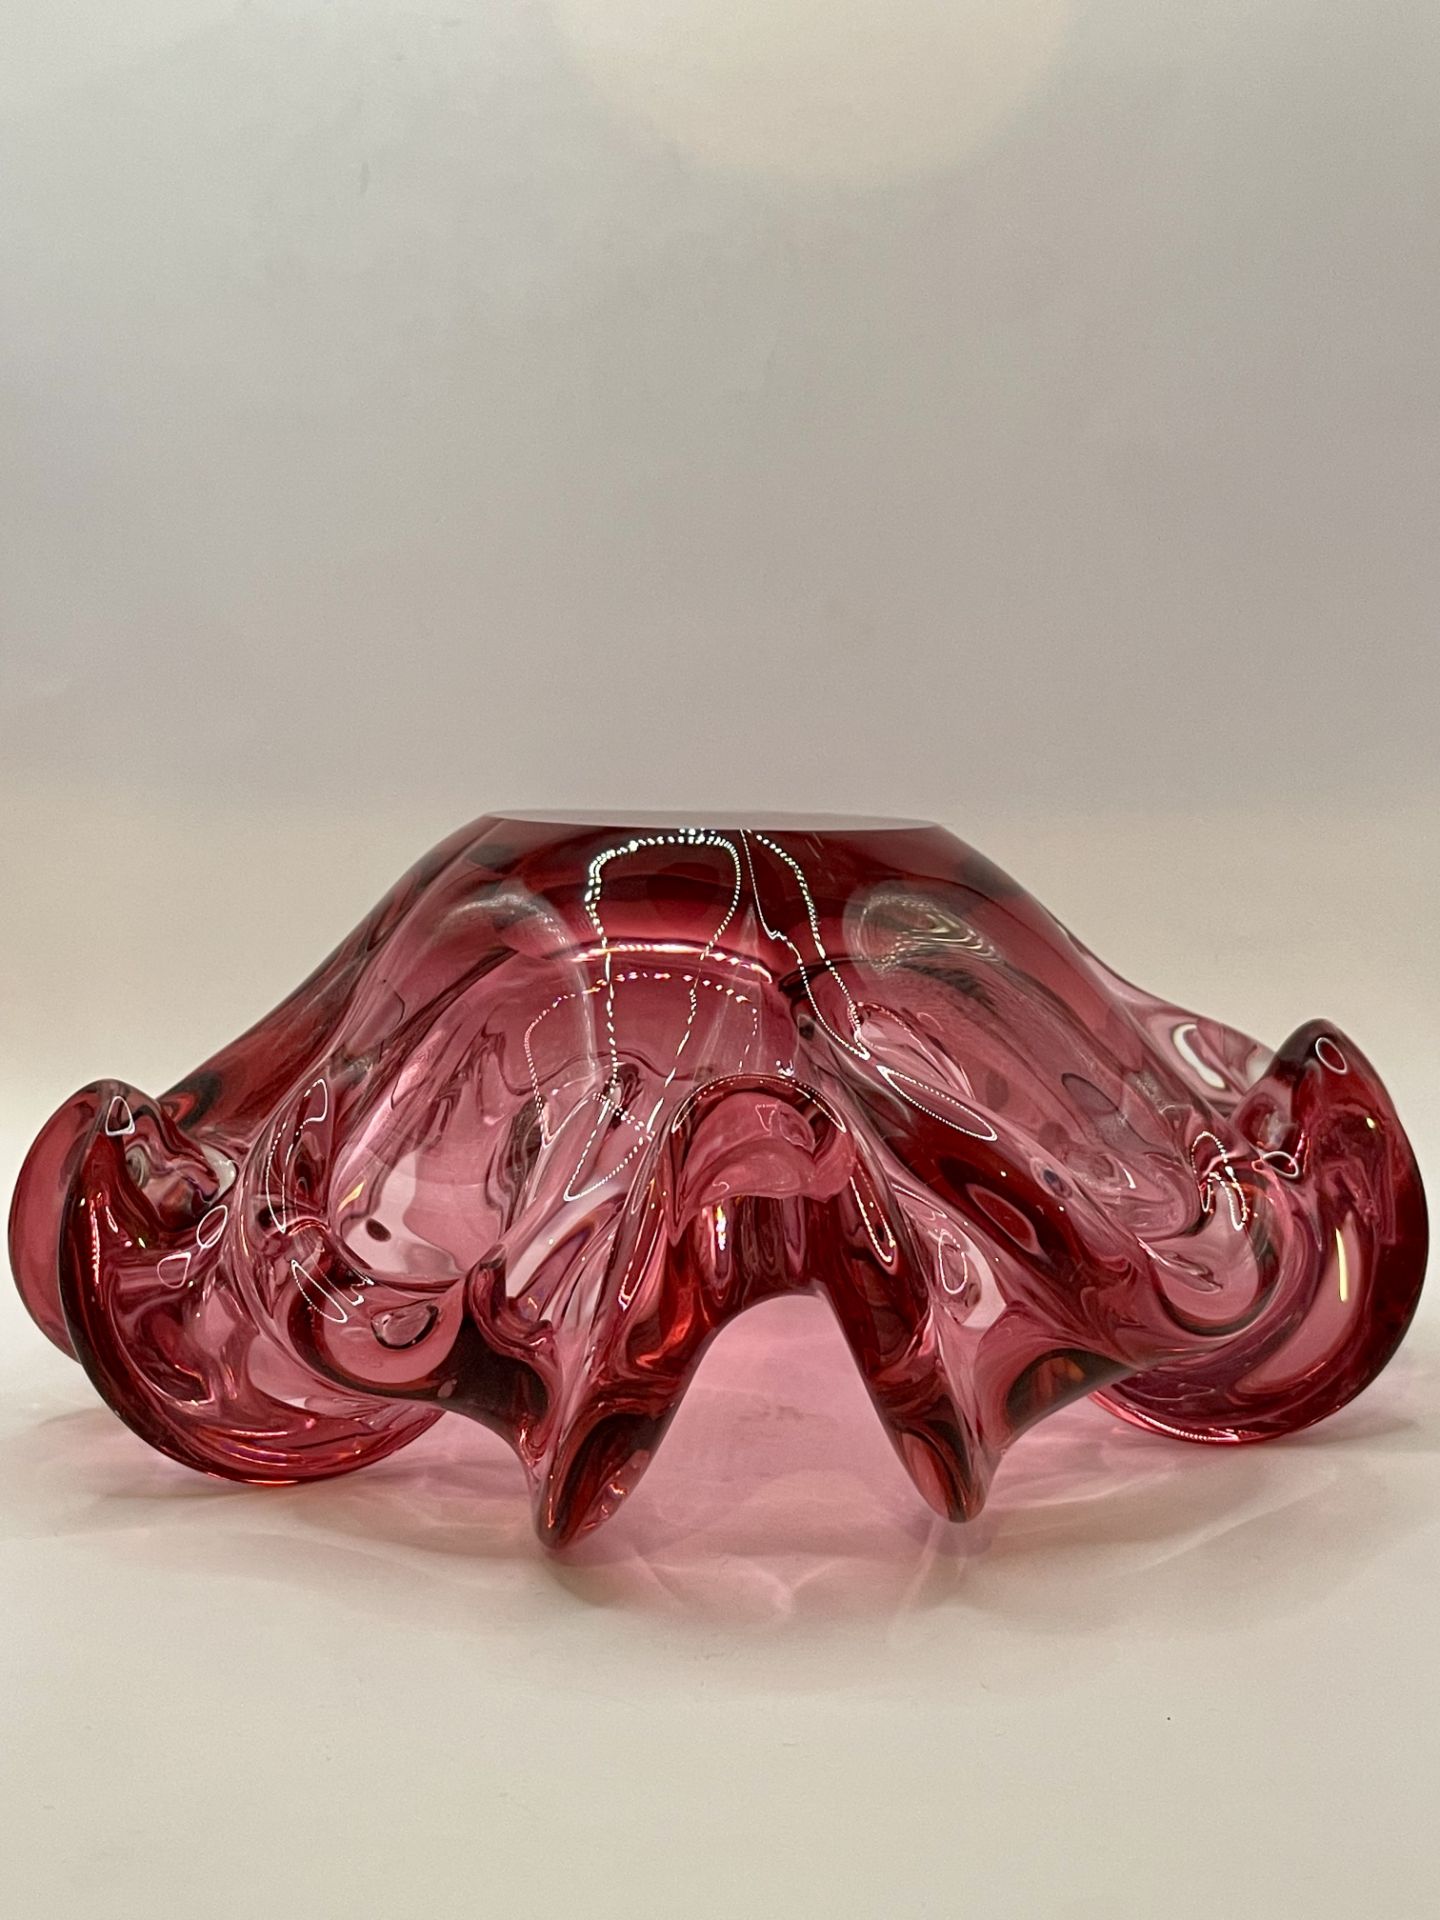 VETRI MURANO GLASS SOMMERSO CENTREPIECE BOWL RUFFLED CRANBERRY ITALY 1950'S - Image 16 of 18